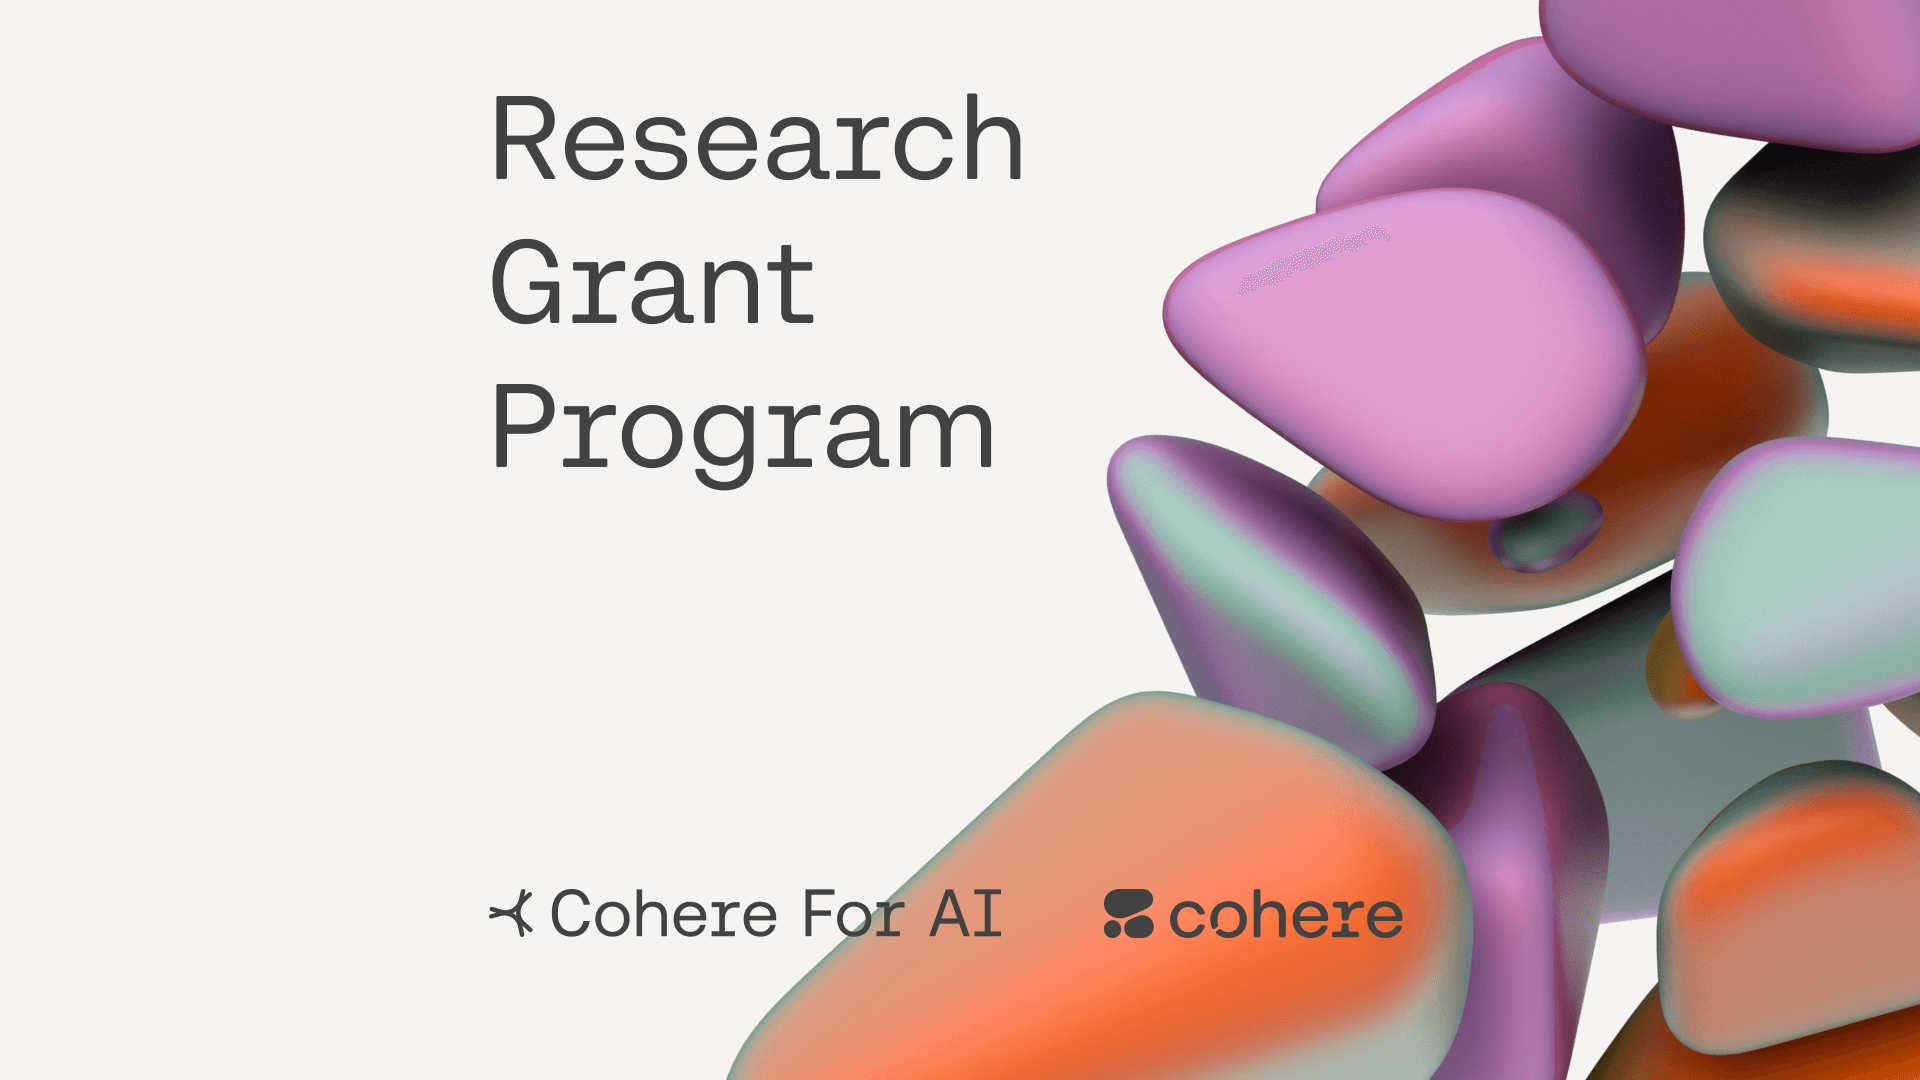 Announcing the Cohere For AI Research Grant Program